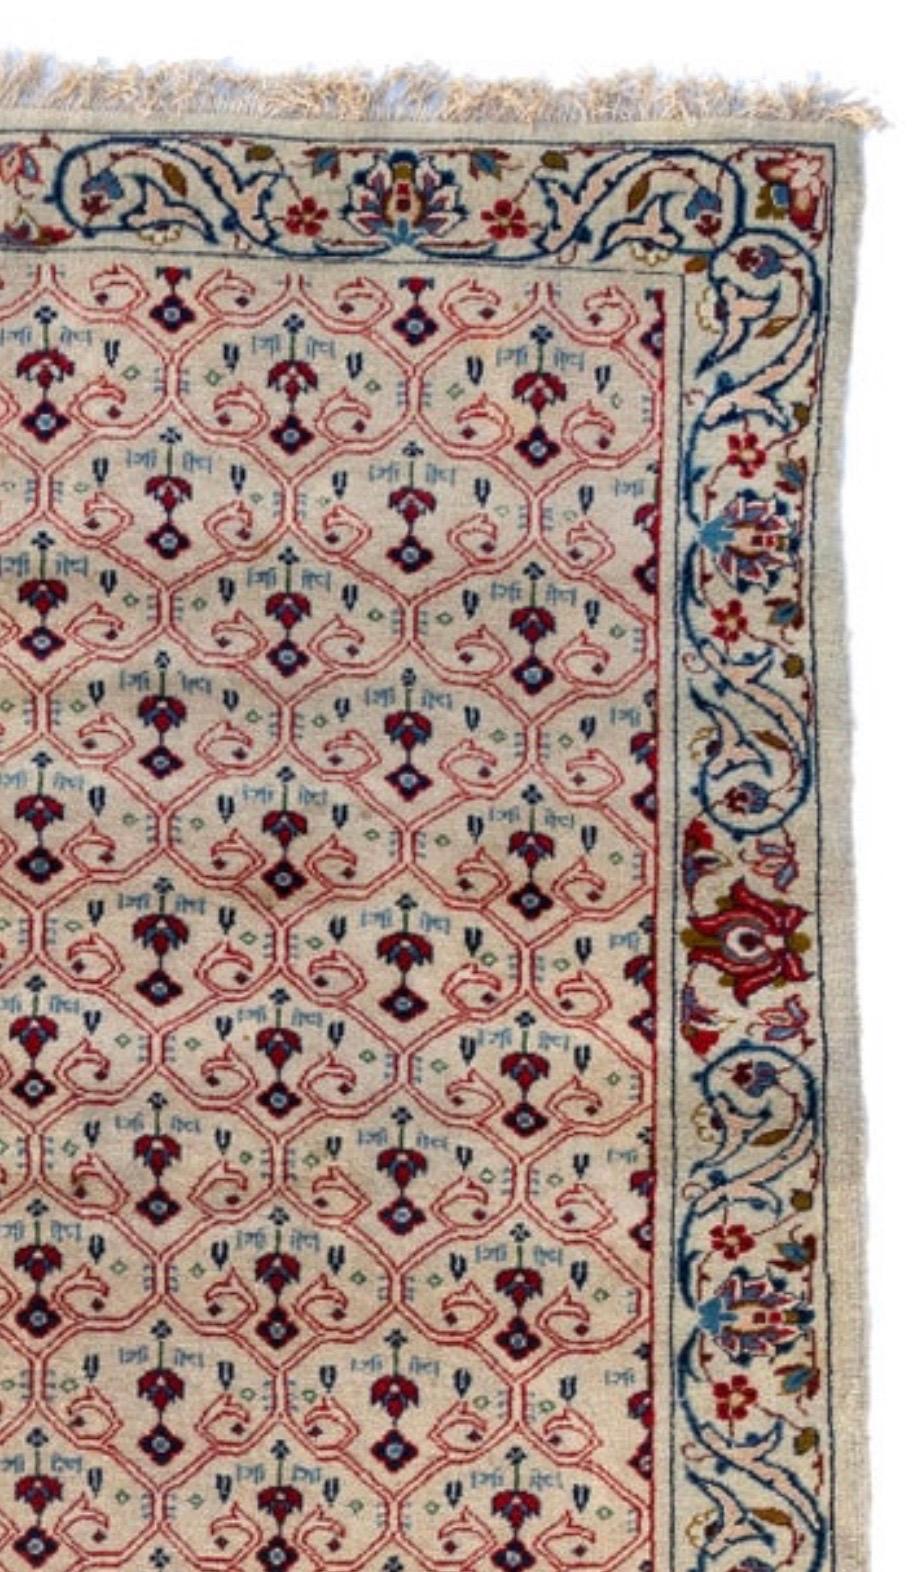 Vintage Persian Red Ivory White Blue Floral Kashan Area Rug In Distressed Condition For Sale In New York, NY